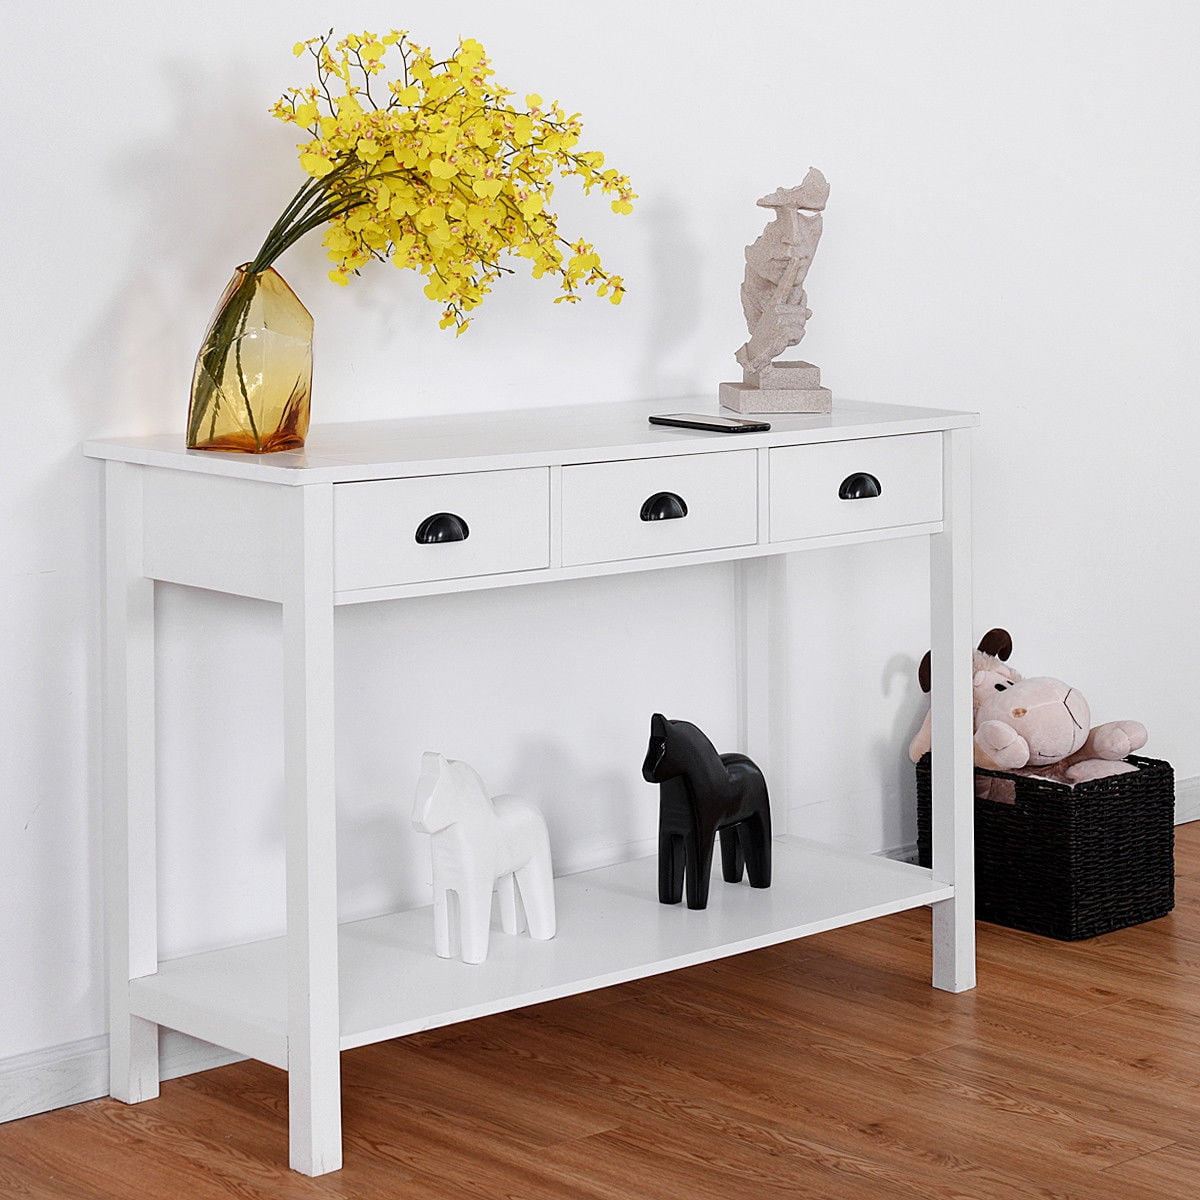 4HOMART White Console Table Corner with 3 Drawers and Storage Shelf Wooden 100CM Side Table Dressing Table Desk for Bedroom Entryway Living Room Furniture 